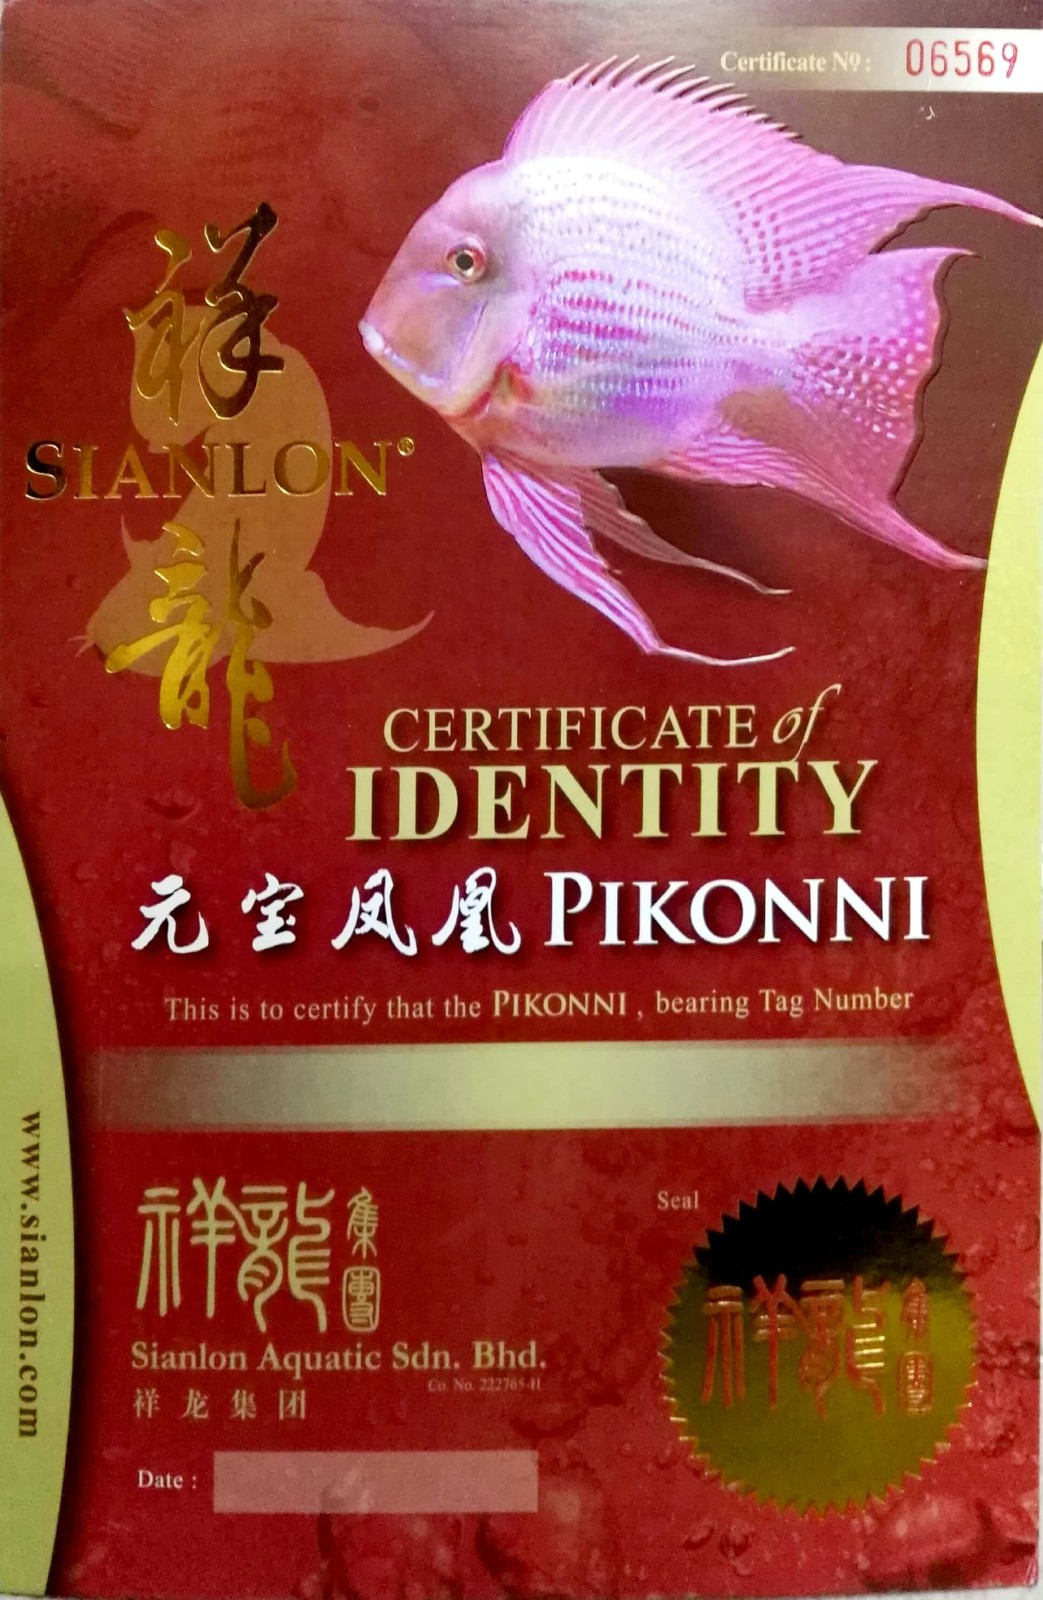 Central CERTIFICATE of DENTITY  PIKONNI